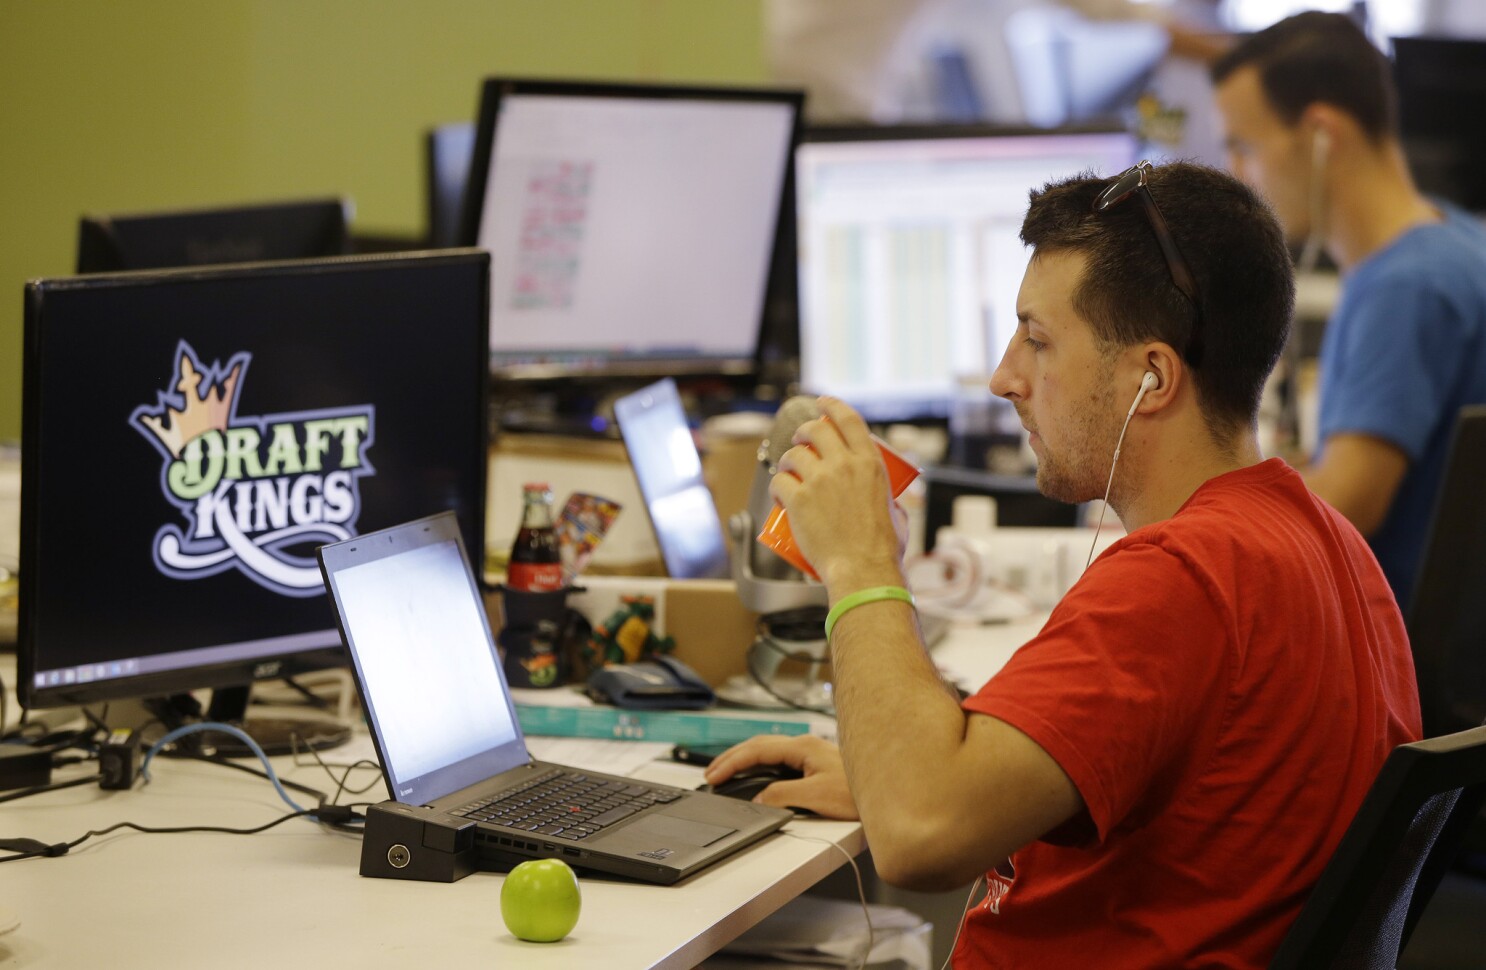 An Employee at DraftKings sips from a plastic cup while working with other colleagues and computer systems in the background